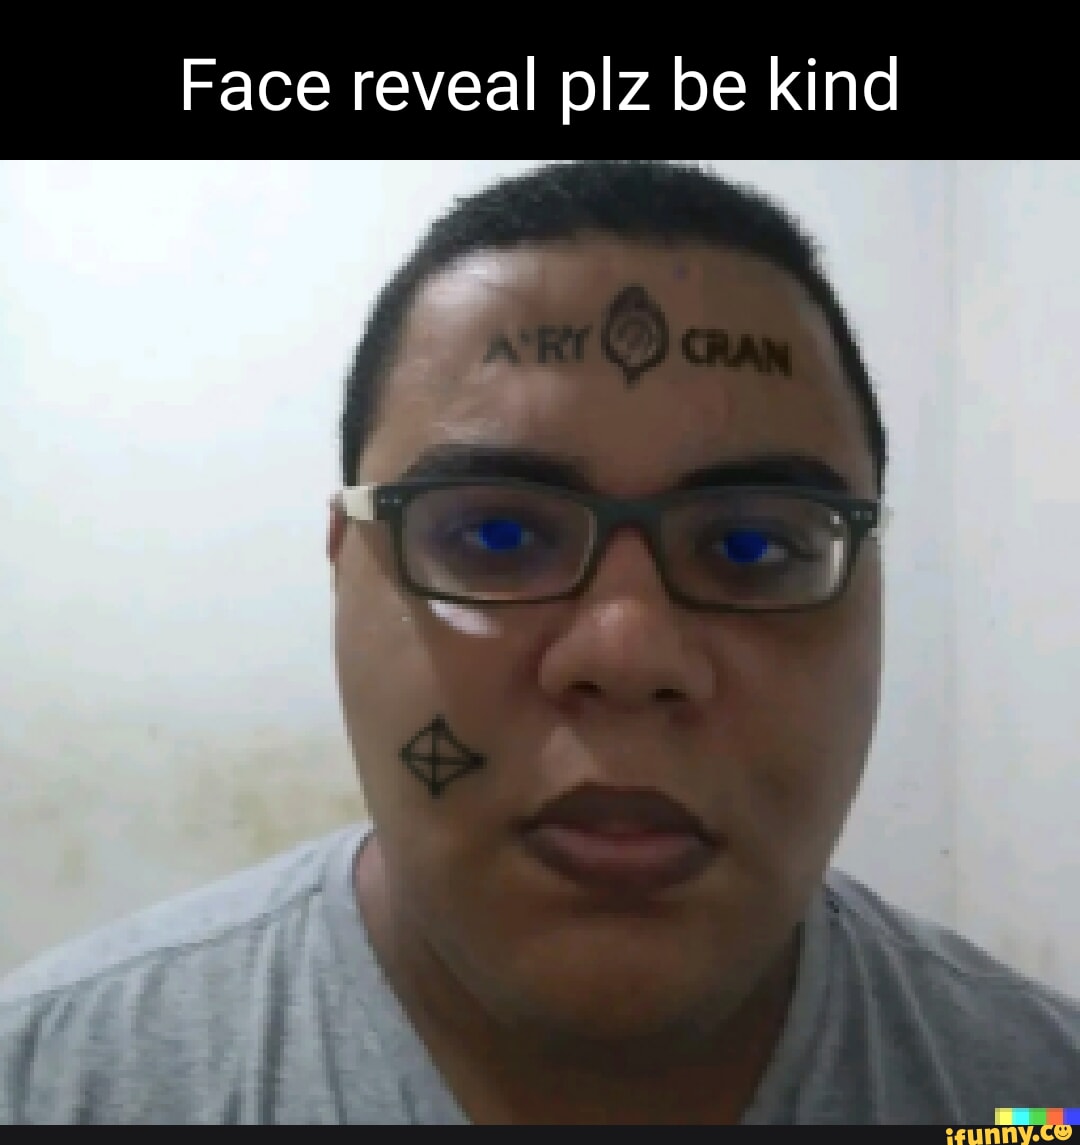 Face reveal be nice - Face reveal be nice - iFunny Brazil